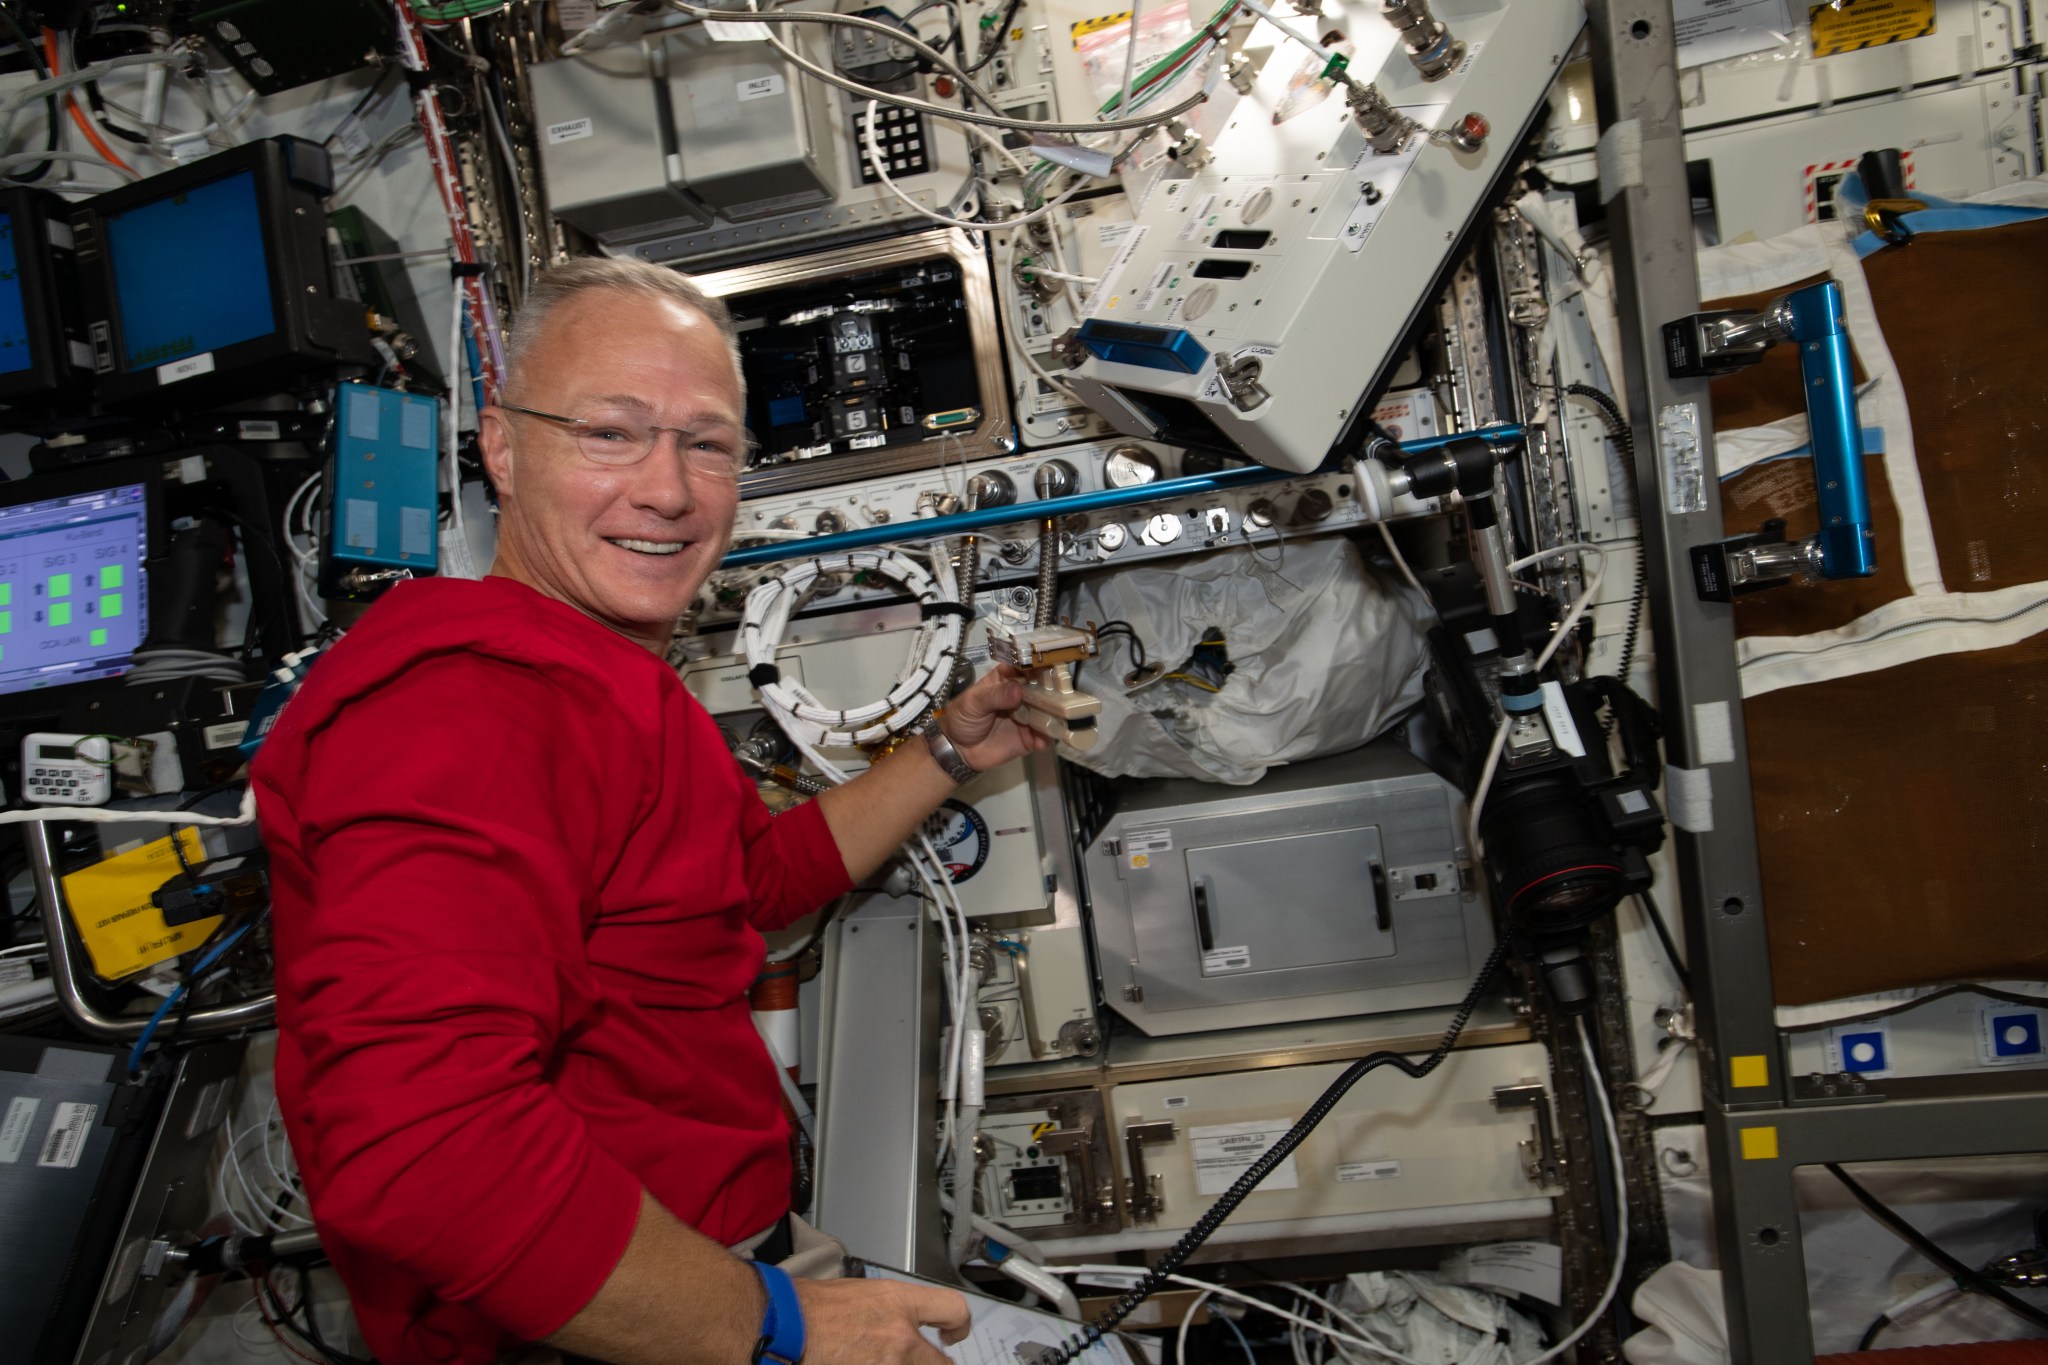 NASA astronaut and Expedition 63 Flight Engineer Doug Hurley works on science hardware inside the International Space Station's U.S. Destiny laboratory. The Multi-use Variable-g Platform is a research facility that can produce up to 2 g of artificial gravity for biological studies of fruit flies, flatworms, plants, fish, cells, protein crystals and many others.